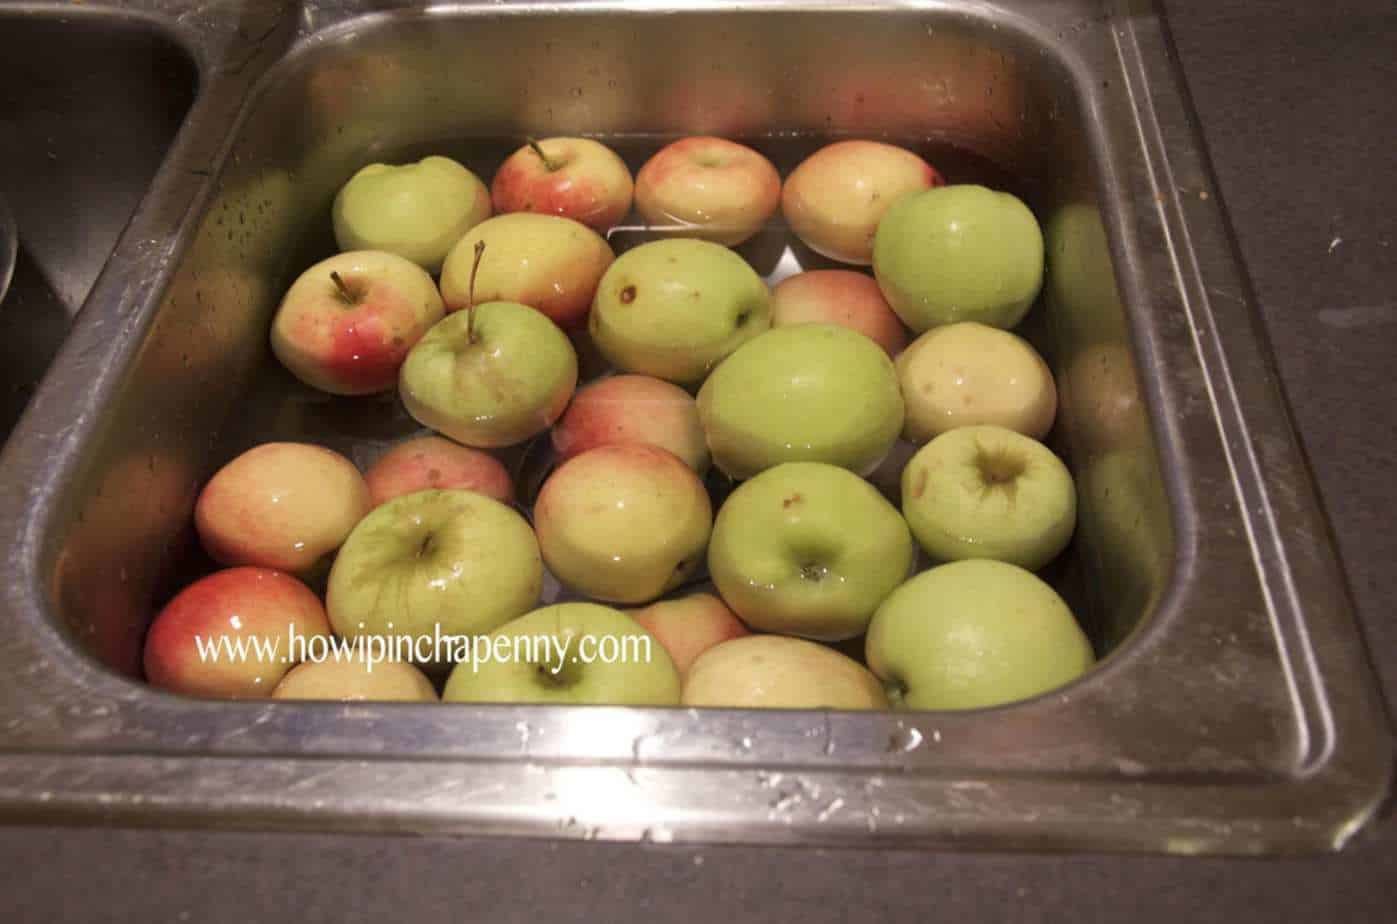 apples being washed for applesauce